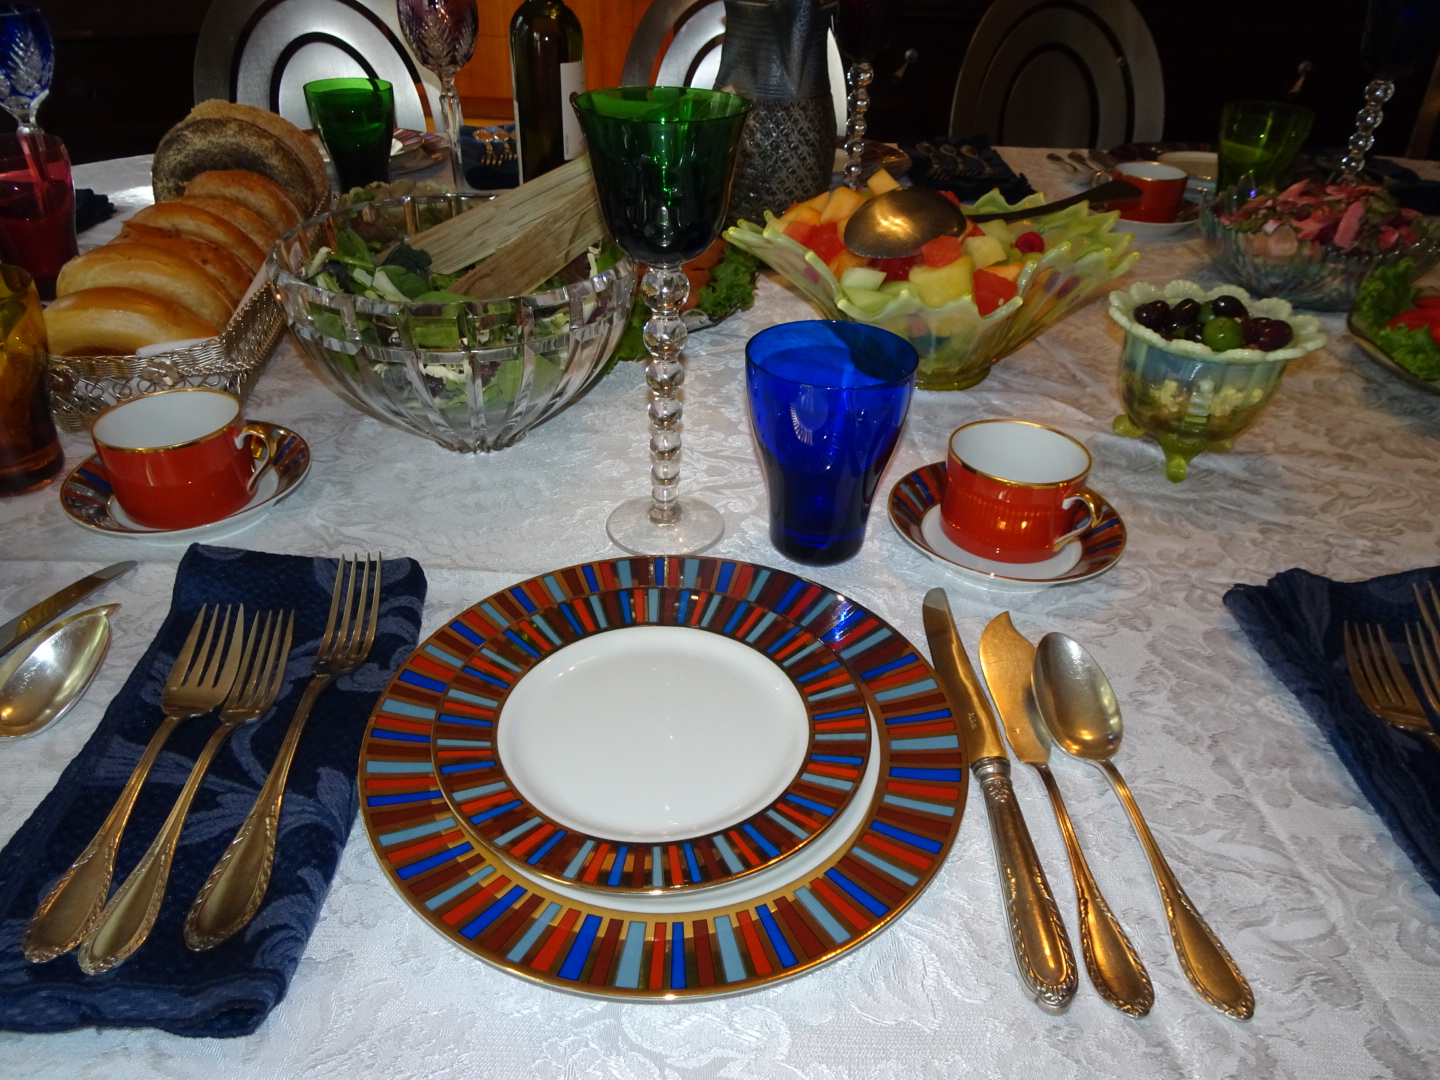 an elaborate dinner setting featuring blue and gold dishes